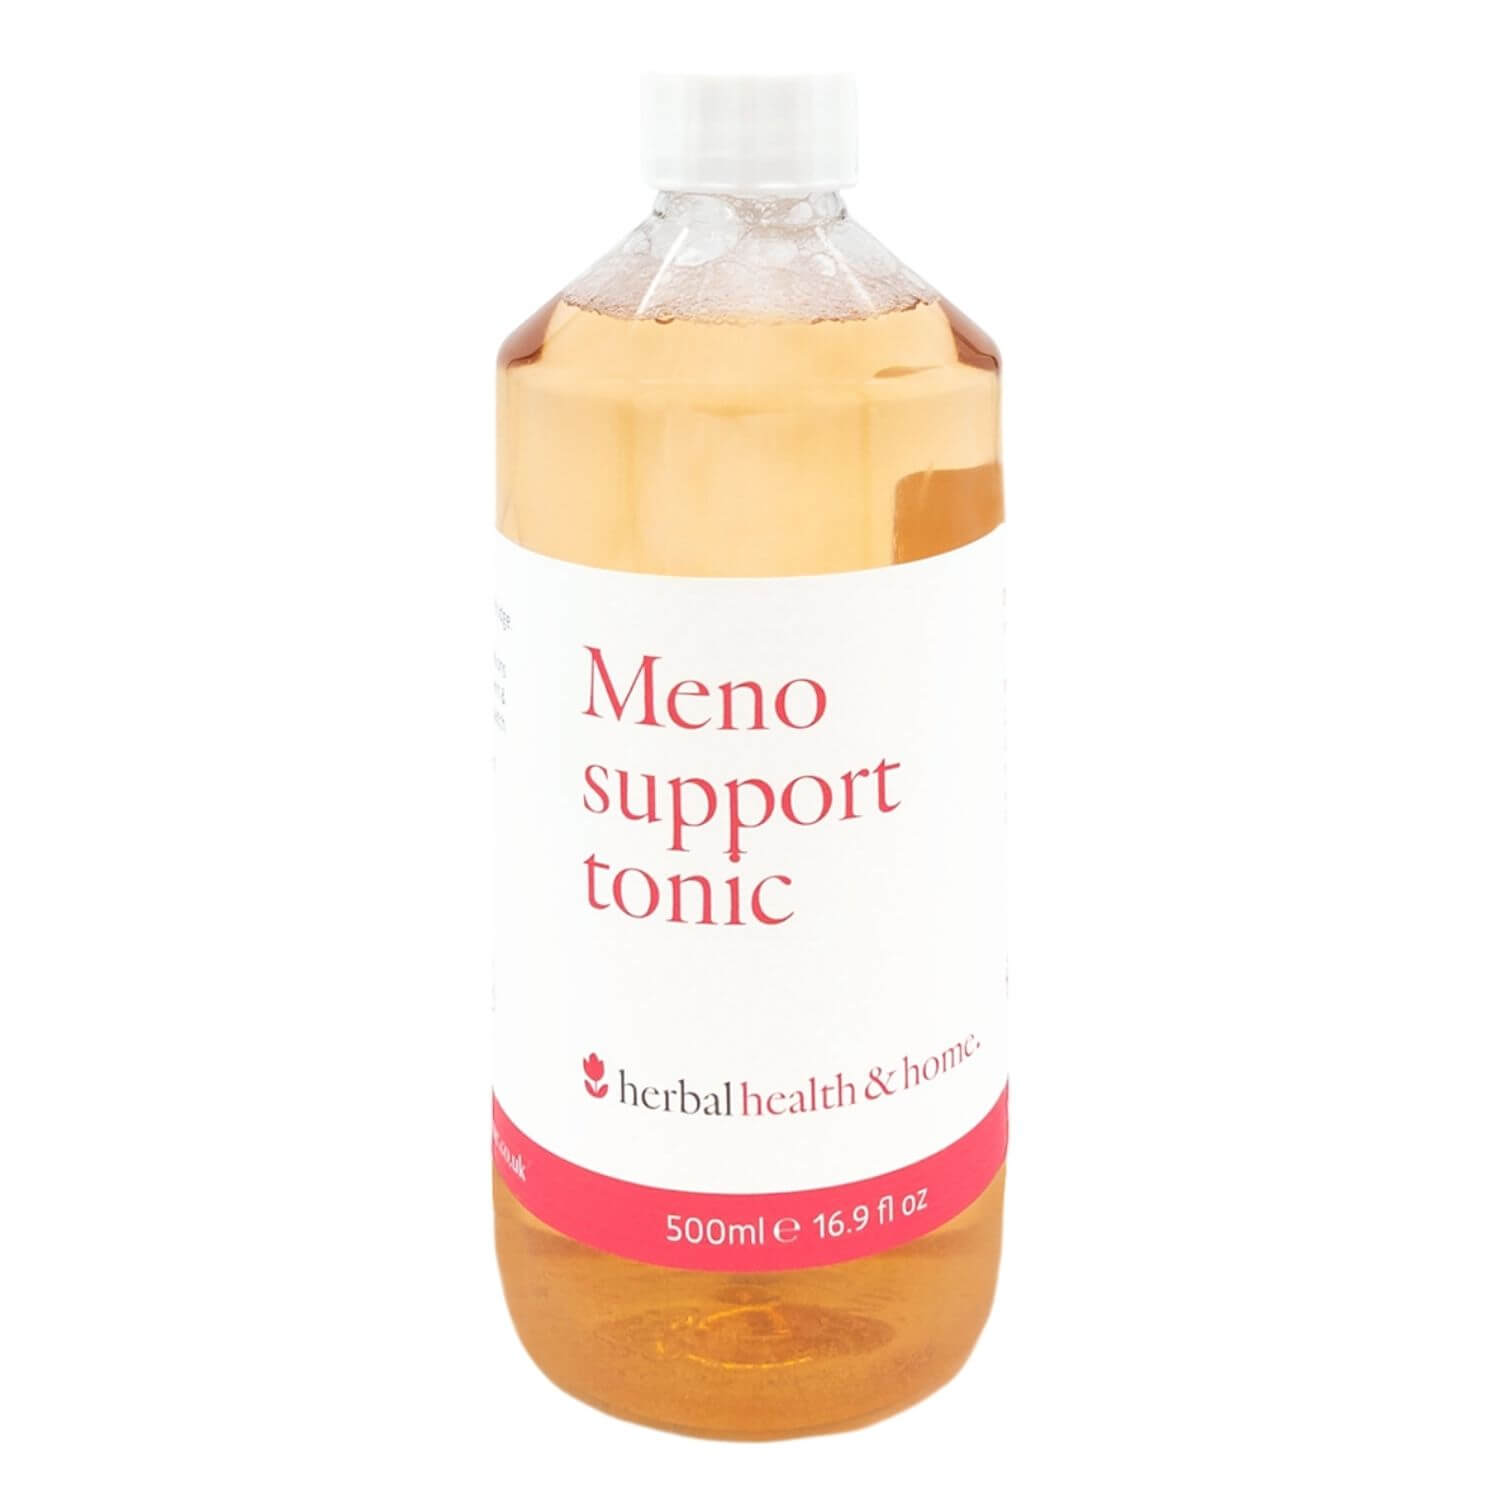 Meno Support Tonic | Herbal, Health & Home